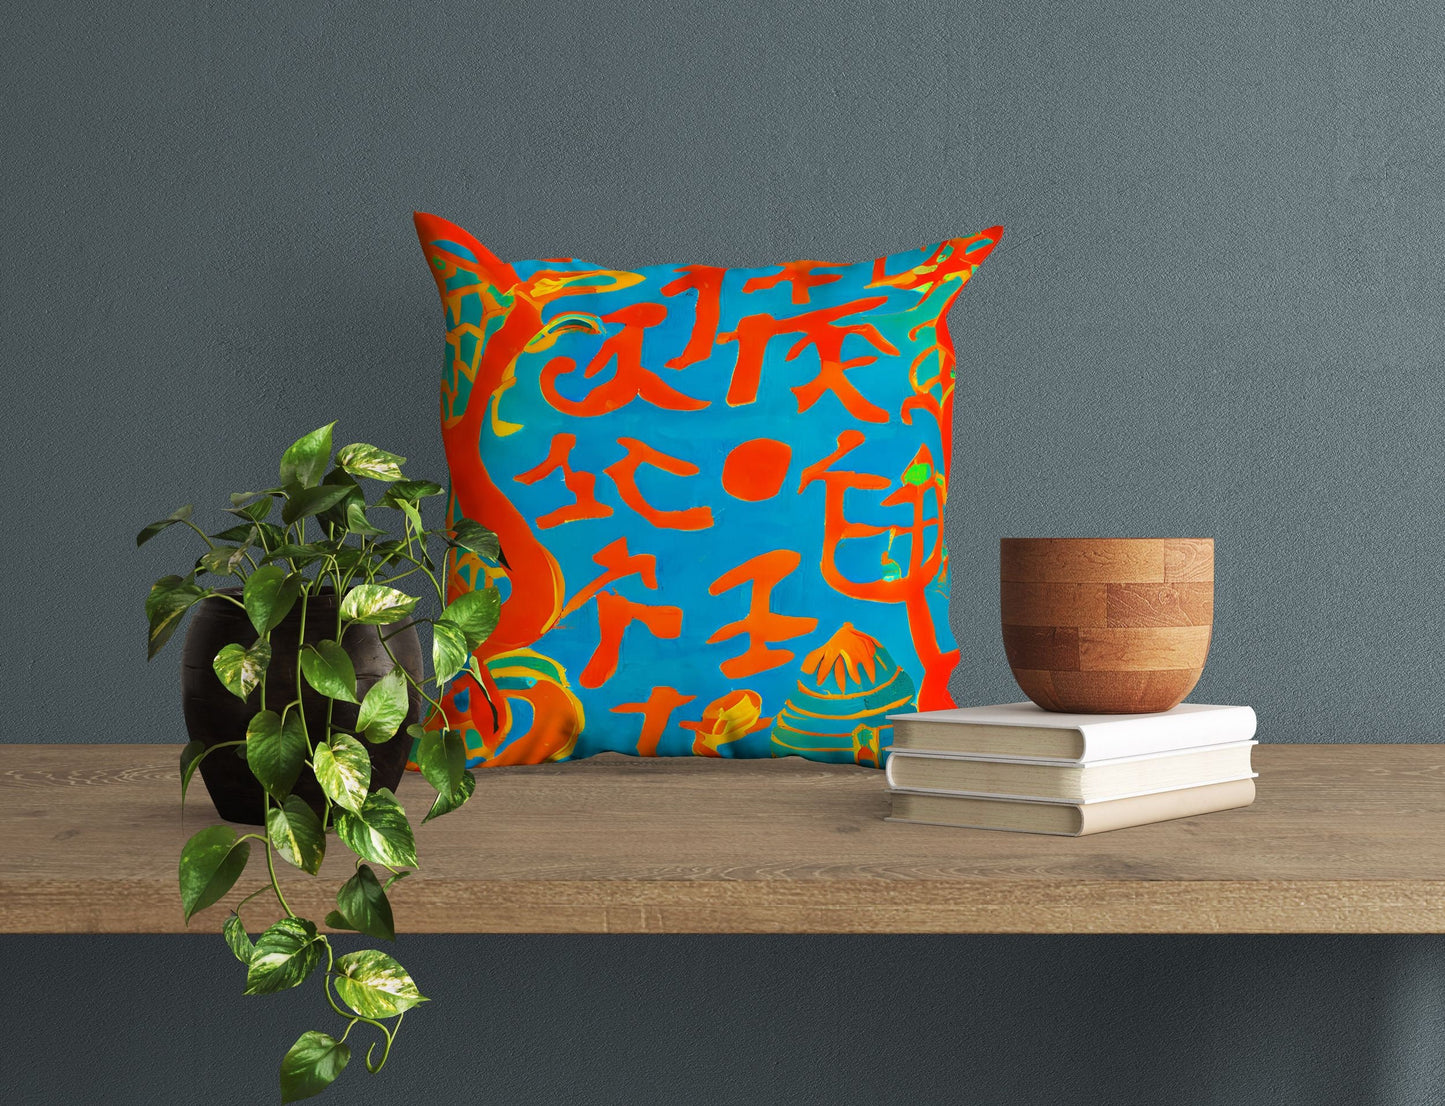 Symbols Of Ancient Chinese Culture, Throw Pillow Cover, Cat Pillow, Art Pillow, Colorful Pillow Case, Contemporary Pillow, Square Pillow